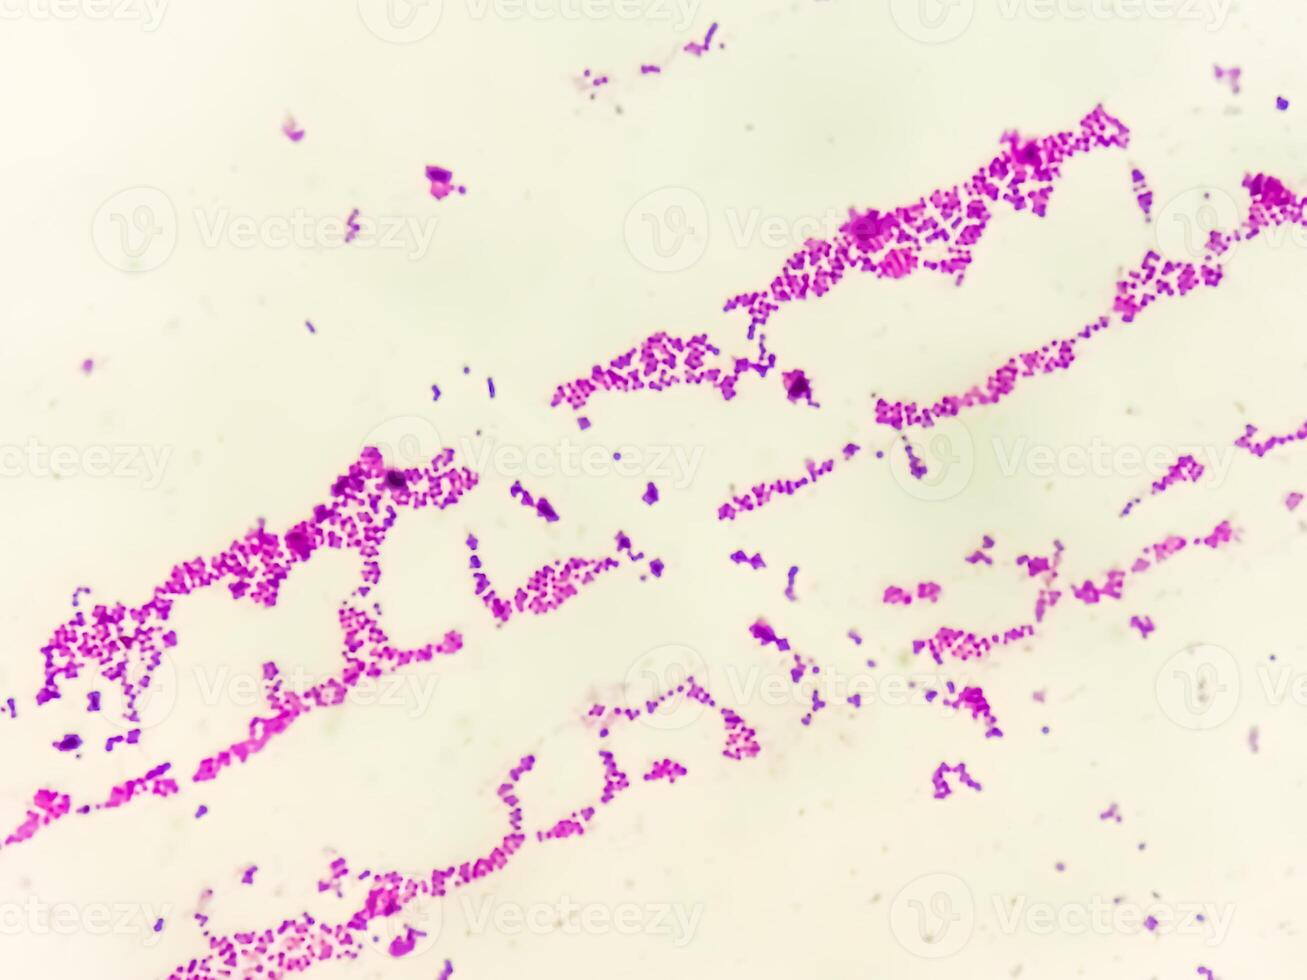 Pus gram stained microscopic showing gram positive bacteria. photo